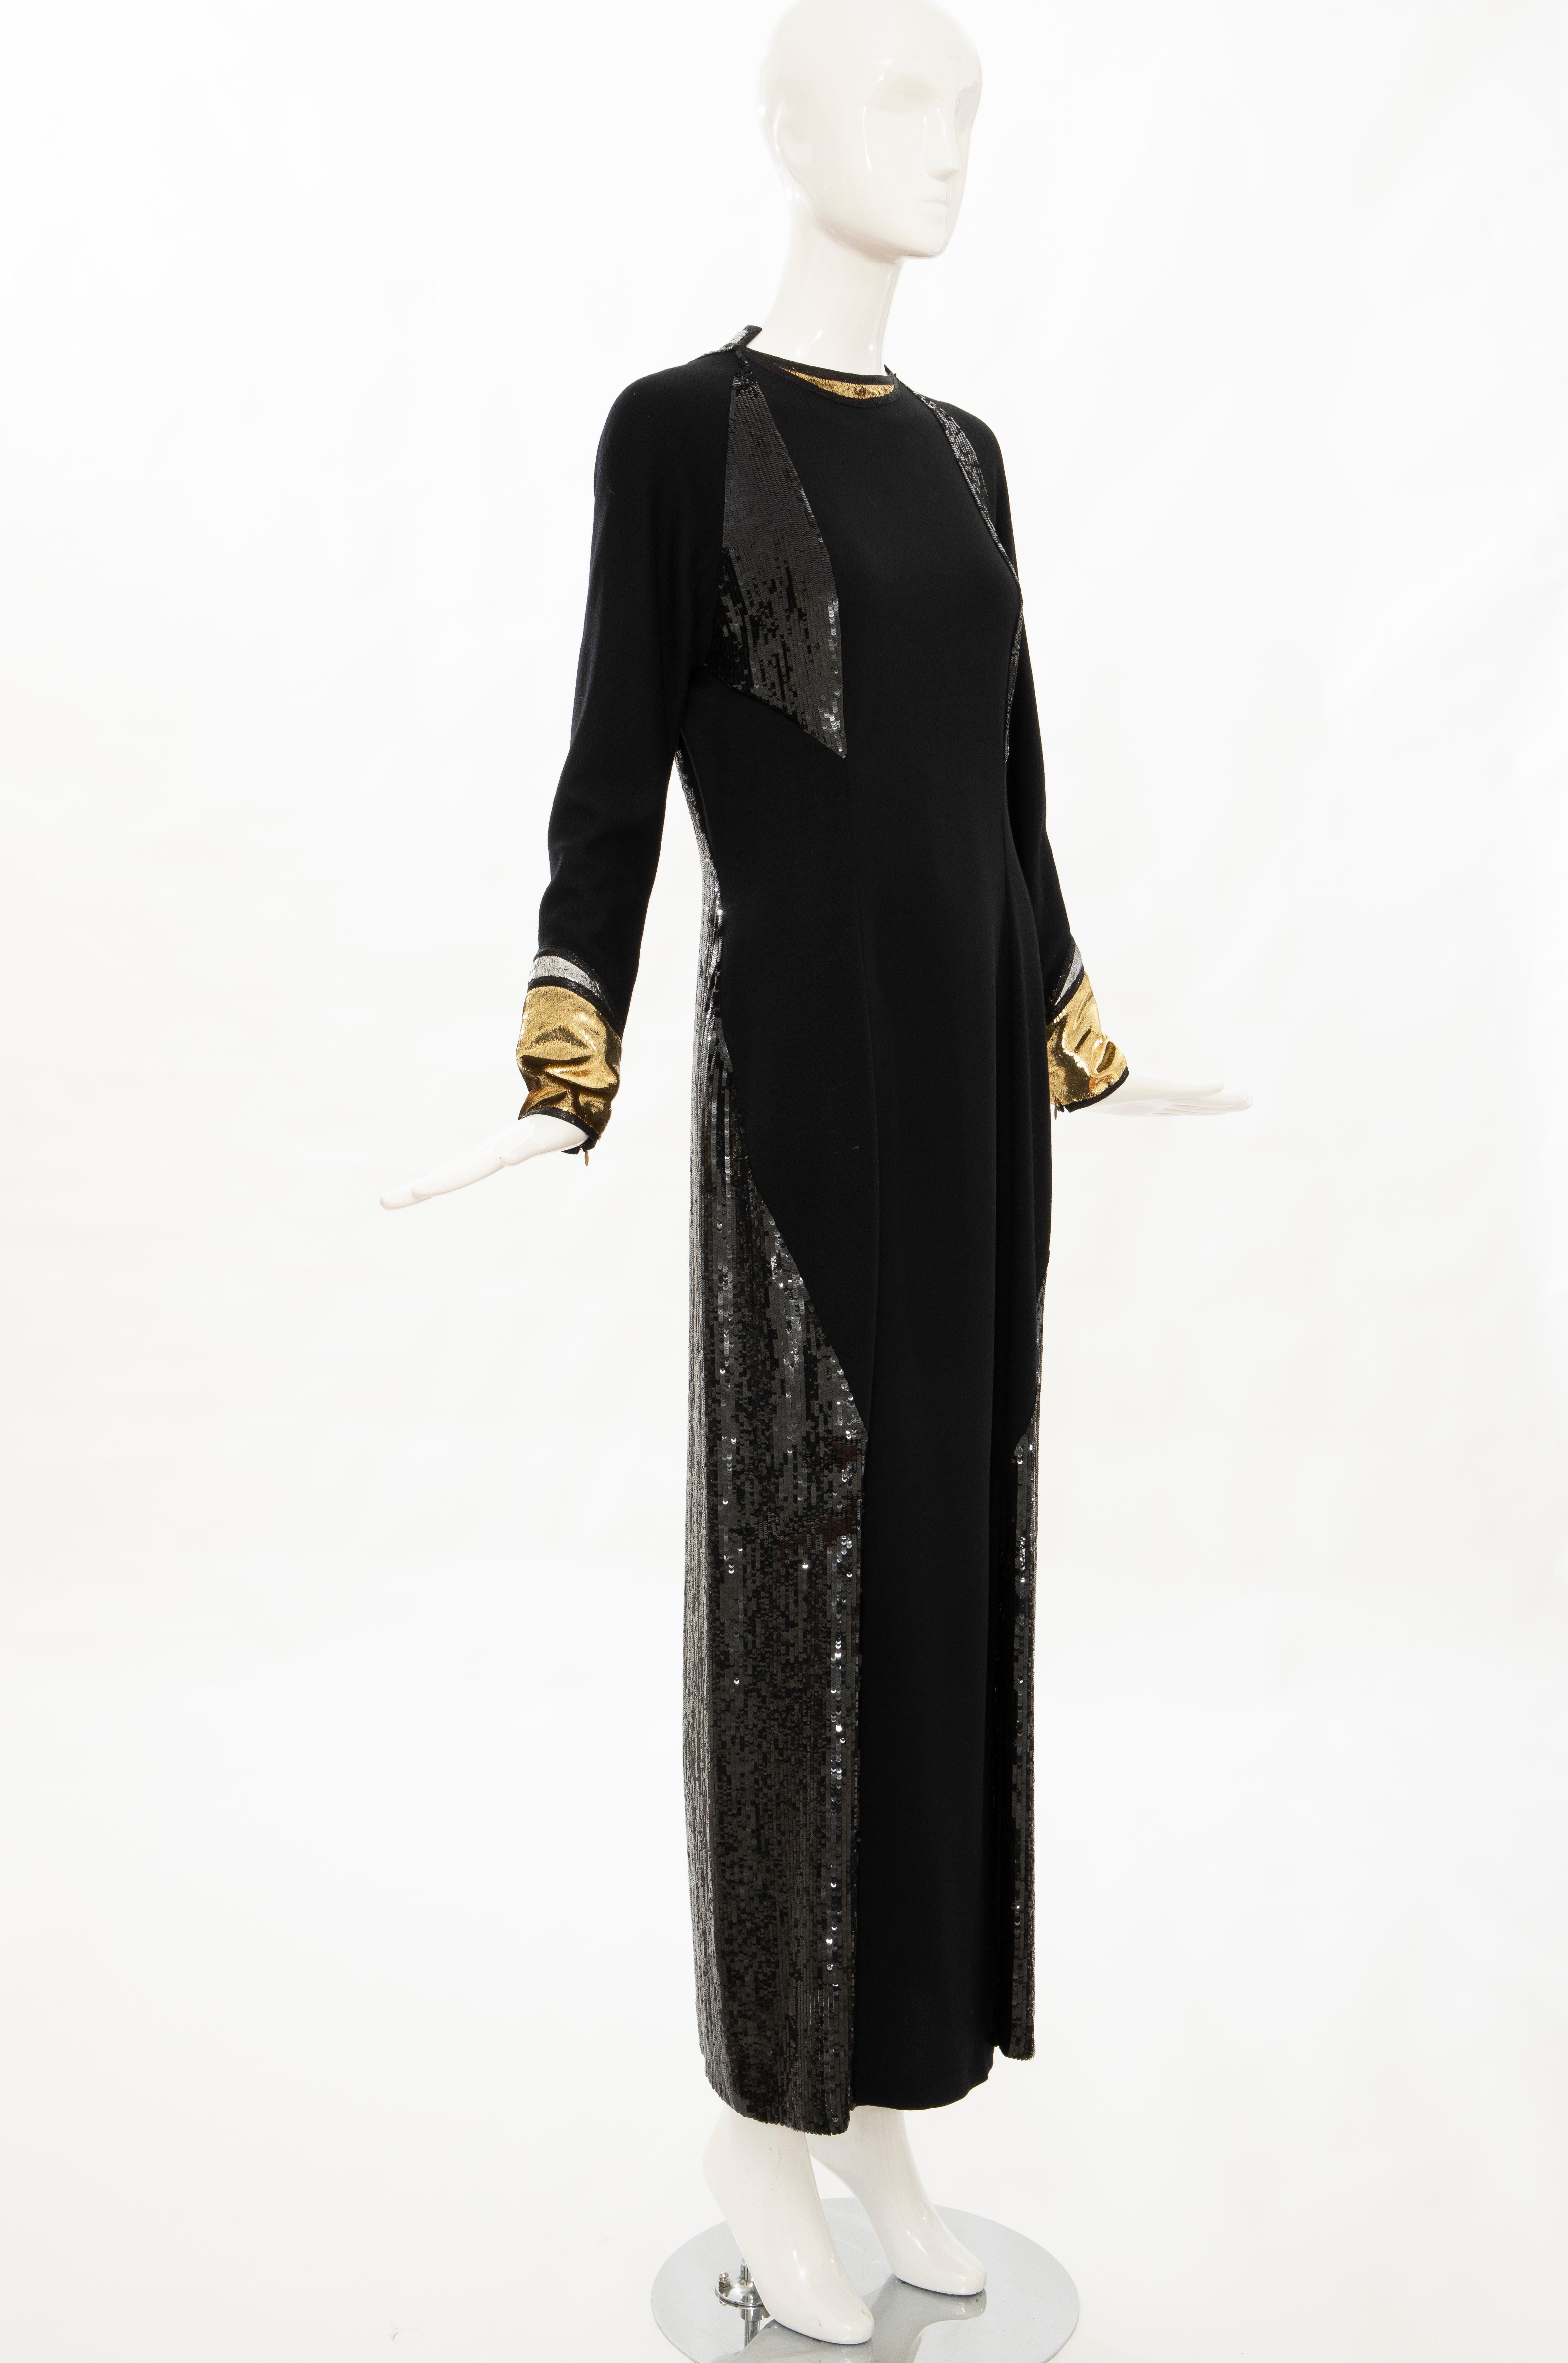 Geoffrey Beene Runway Black Wool Silk Embroidered Sequin Evening Dress, Fall 1992 In Excellent Condition For Sale In Cincinnati, OH